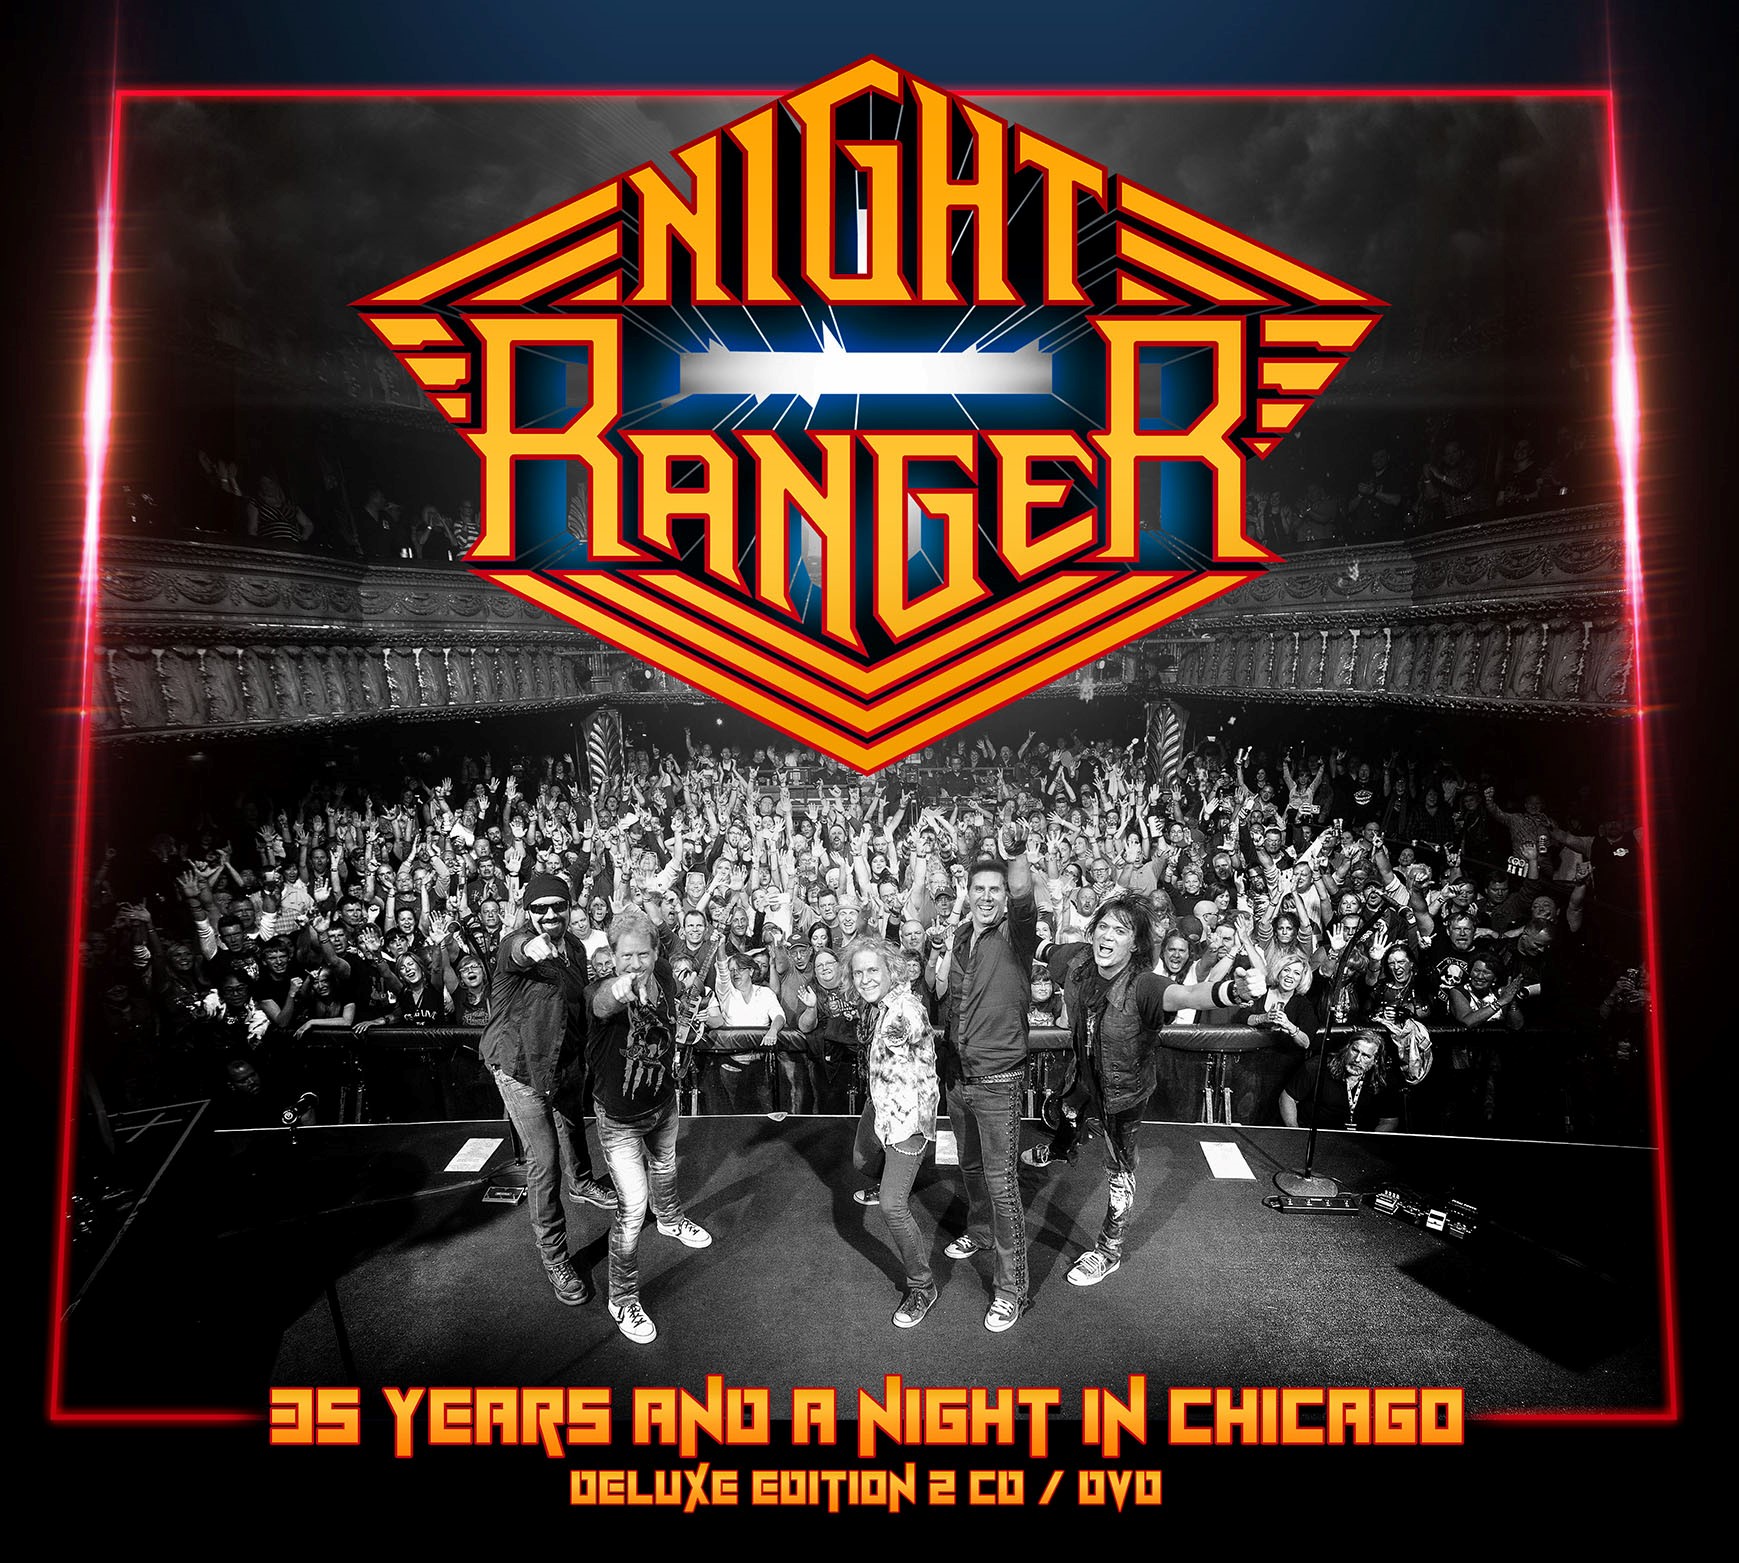 NIGHT RANGER - 35 Years and a Night in Chicago (Deluxe Ed.)